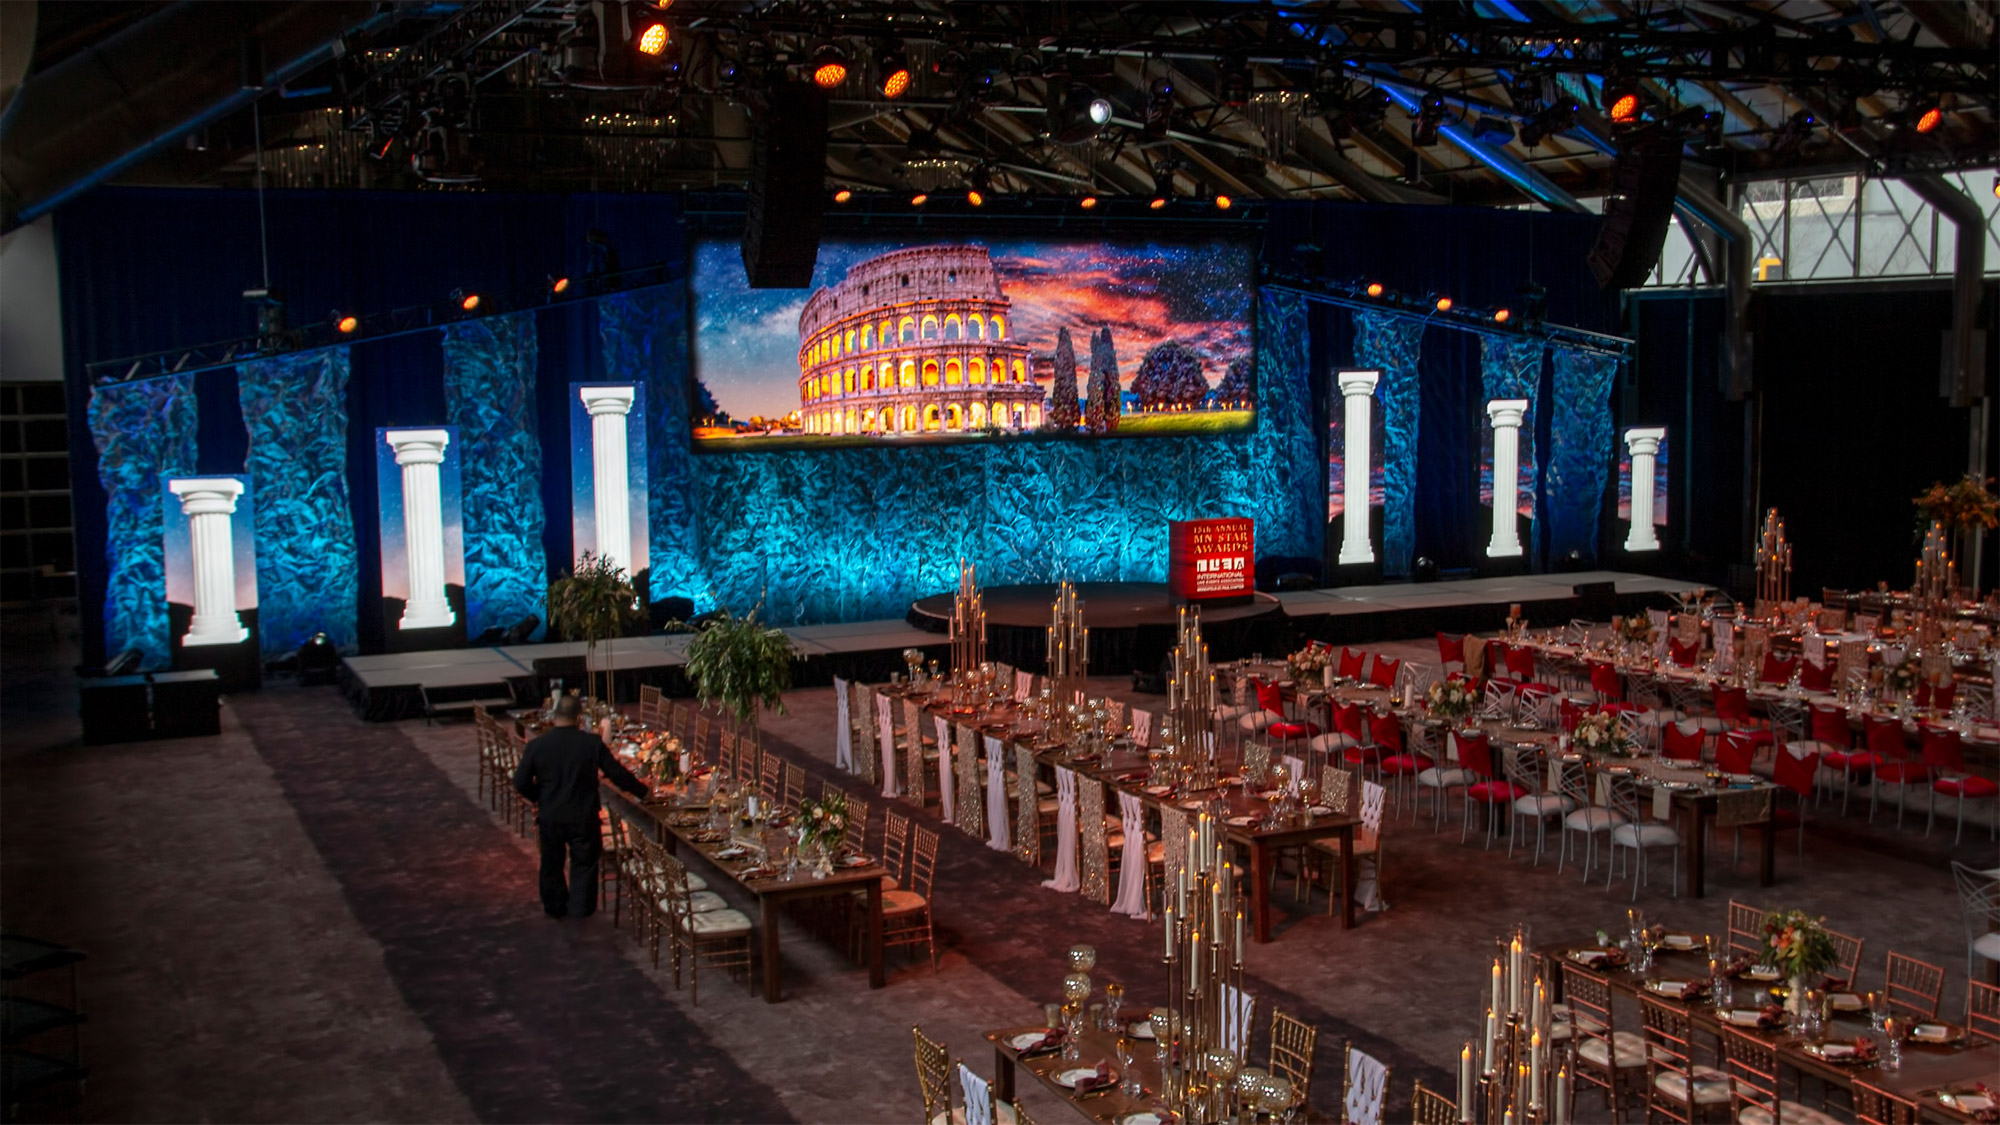 How to Format an Event Video for a Large LED Screen